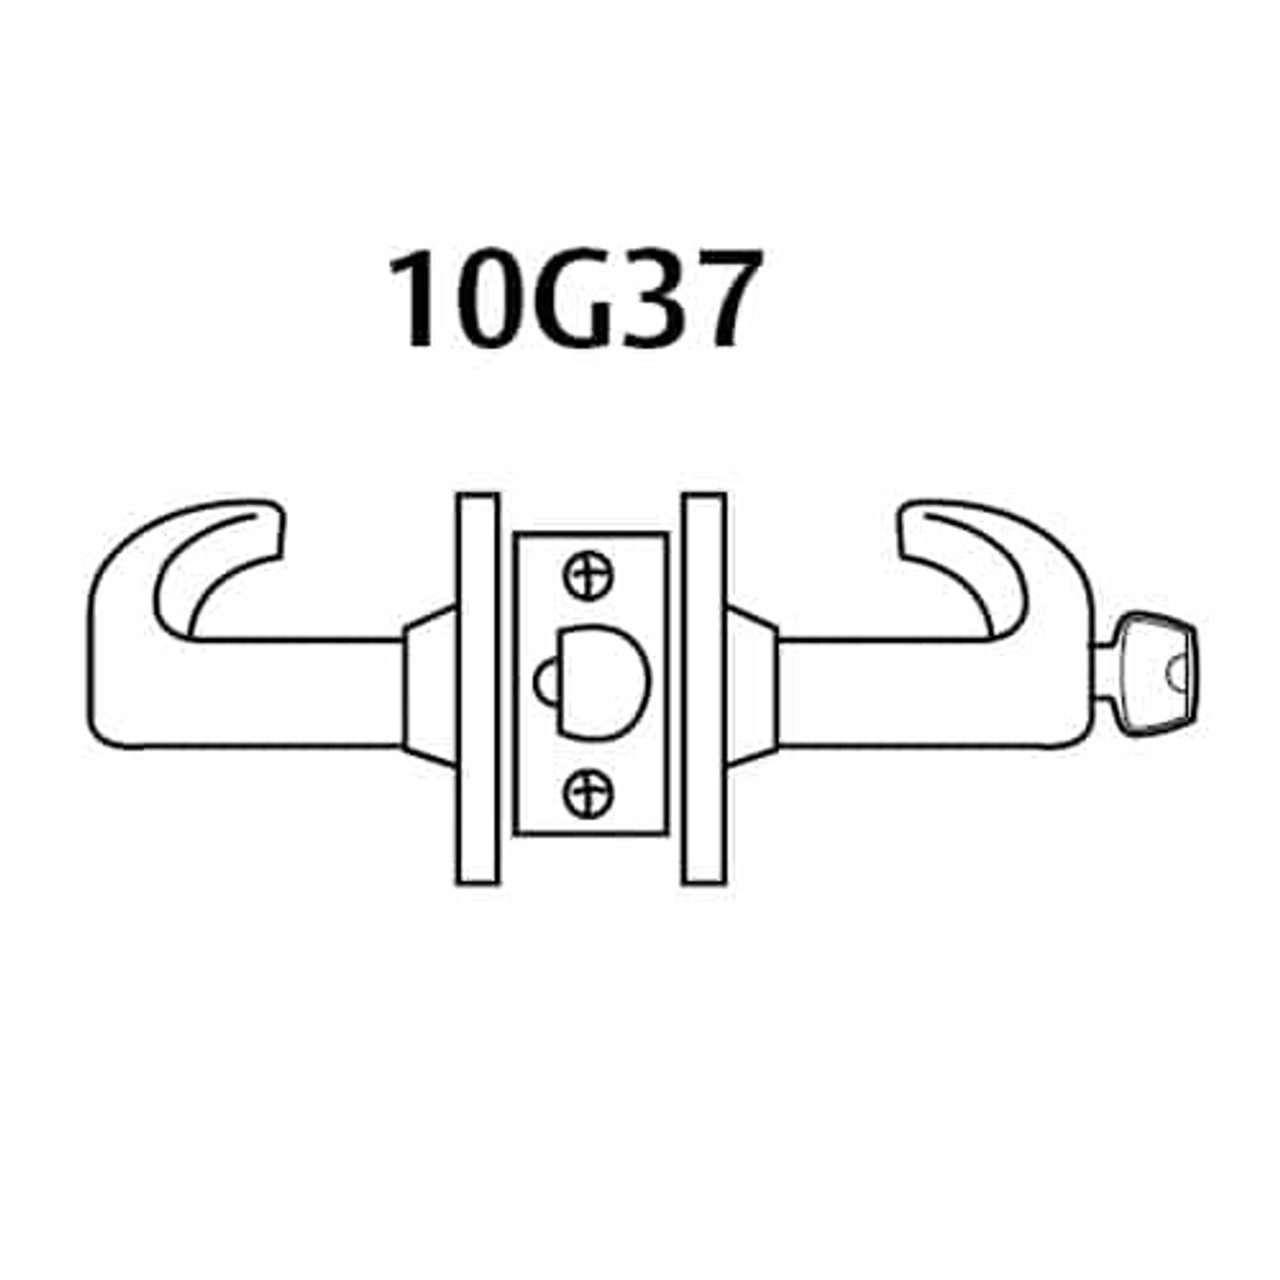 2870-10G37-GB-03 Sargent 10 Line Cylindrical Classroom Locks with B Lever Design and G Rose Prepped for SFIC in Bright Brass